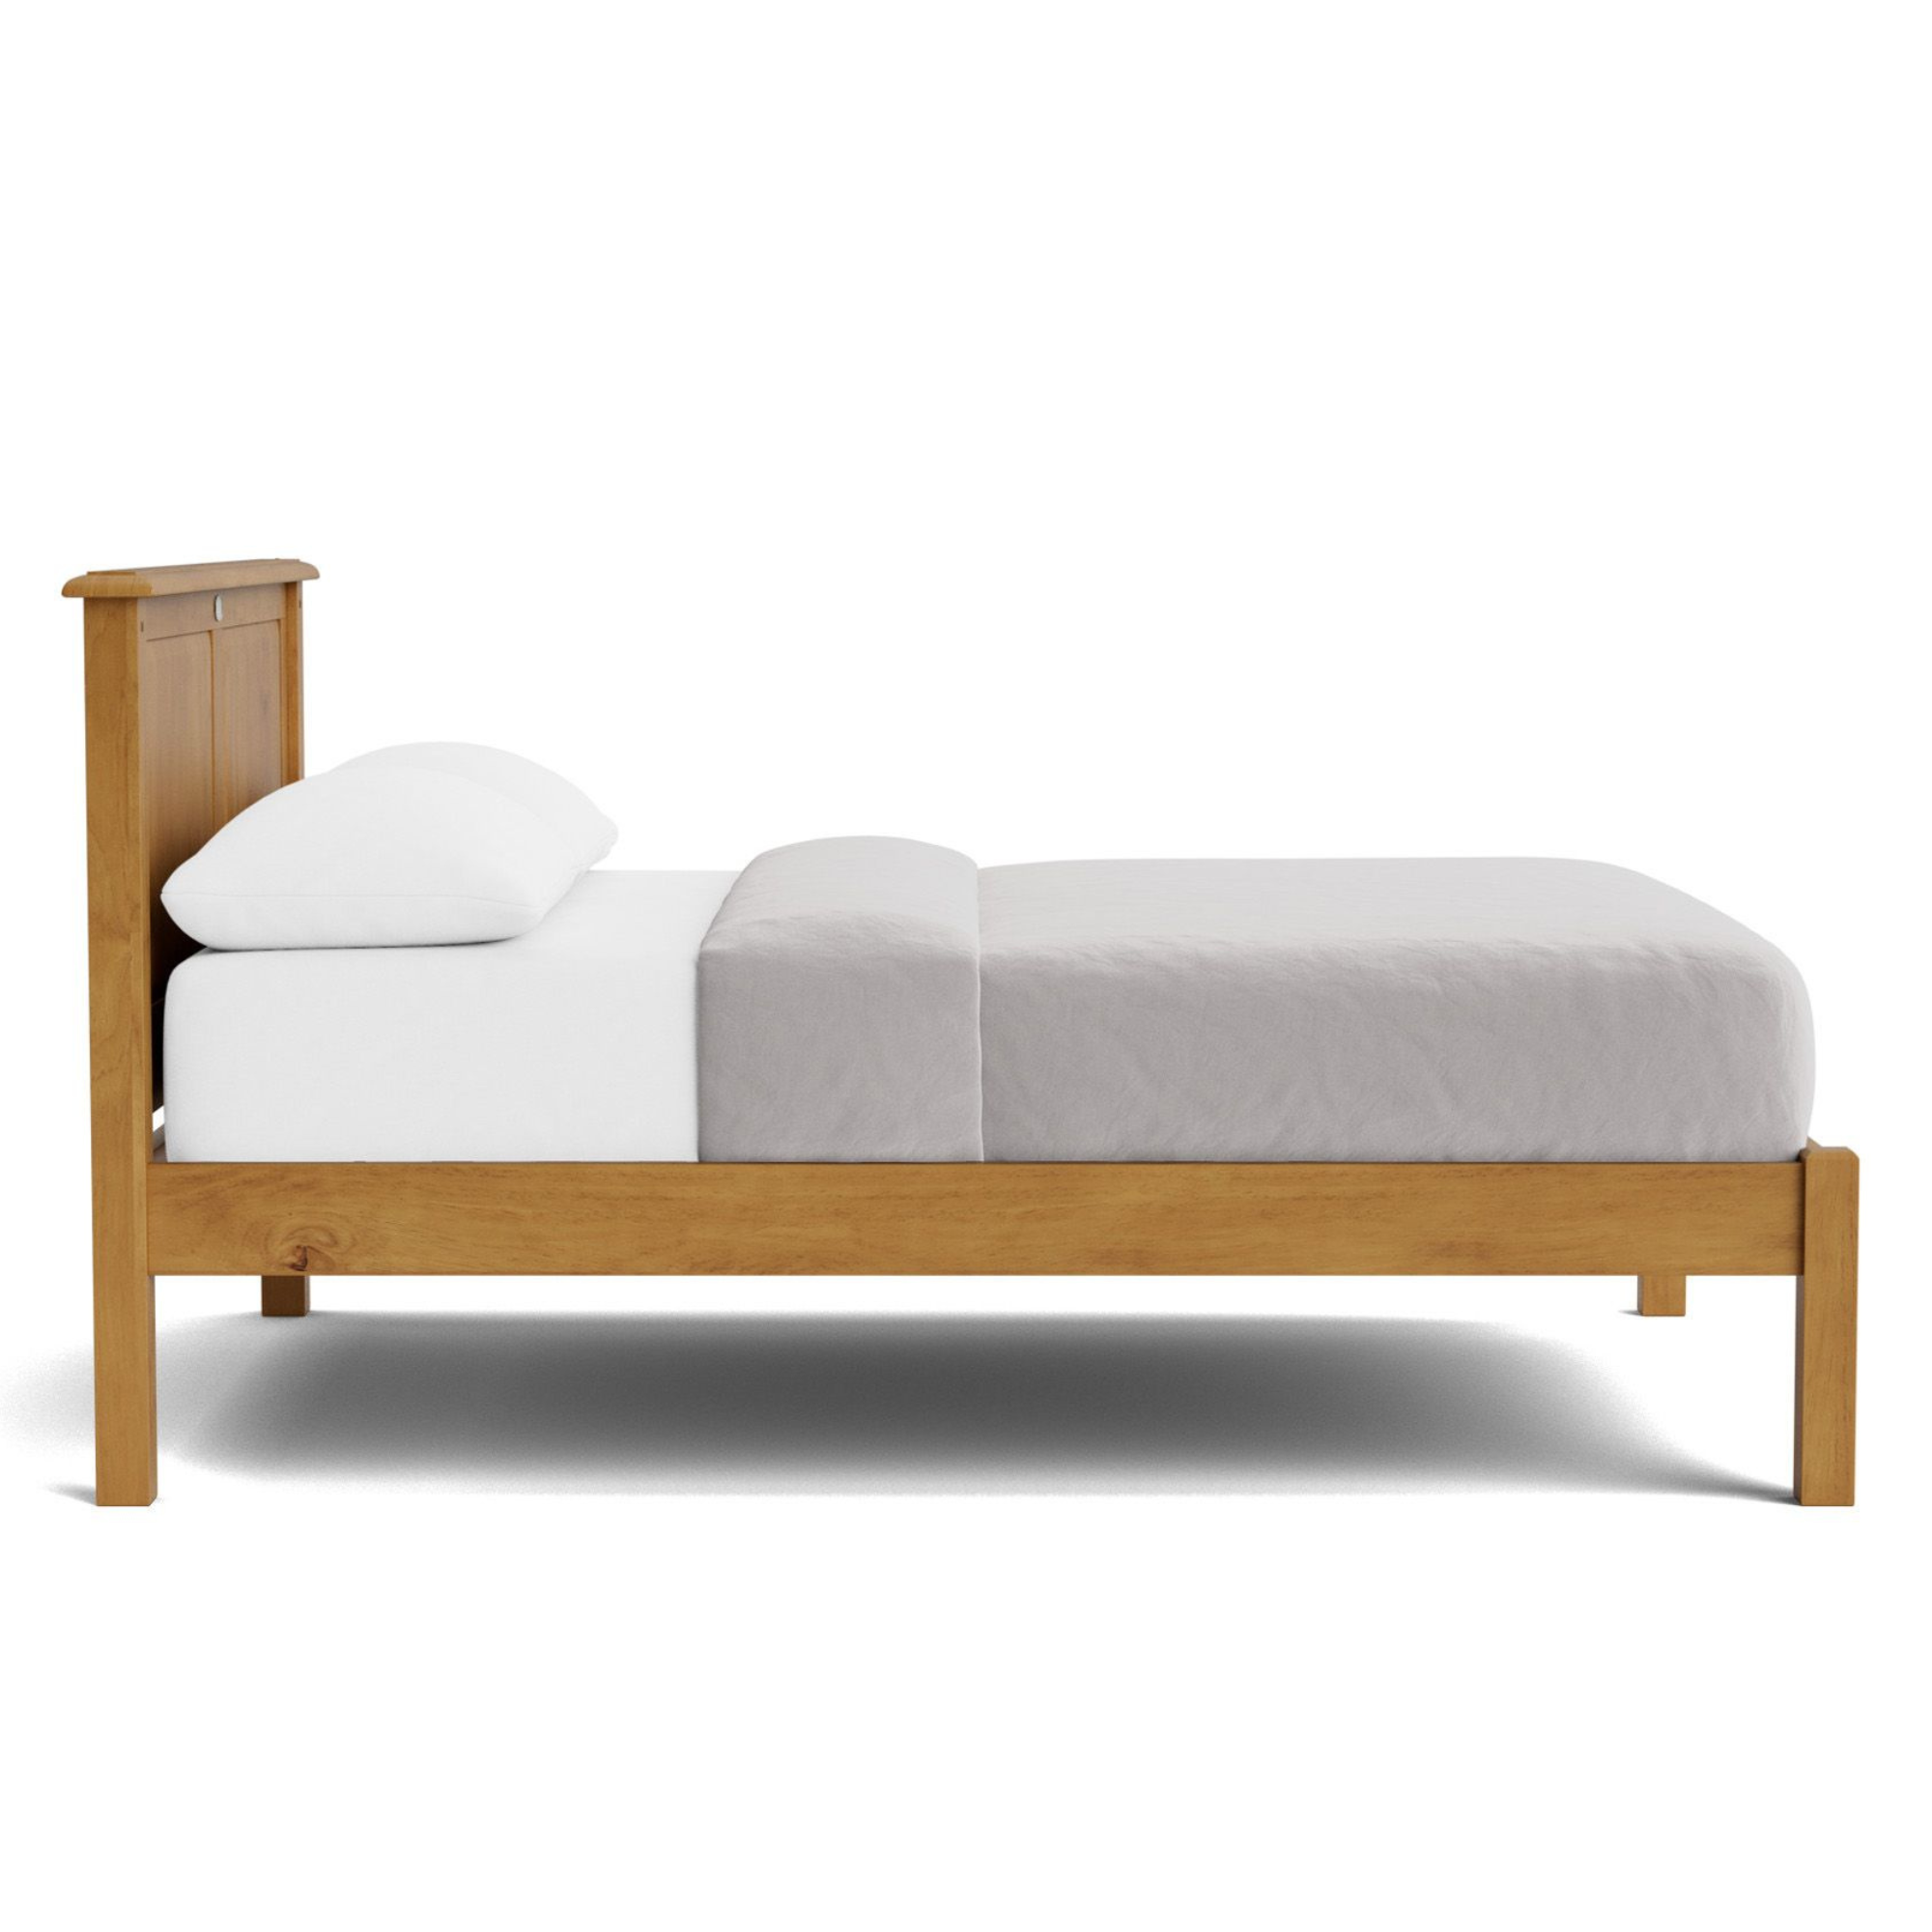 VILLAGER SLAT BED WITH LOW FOOT | ALL SIZES | NZ MADE